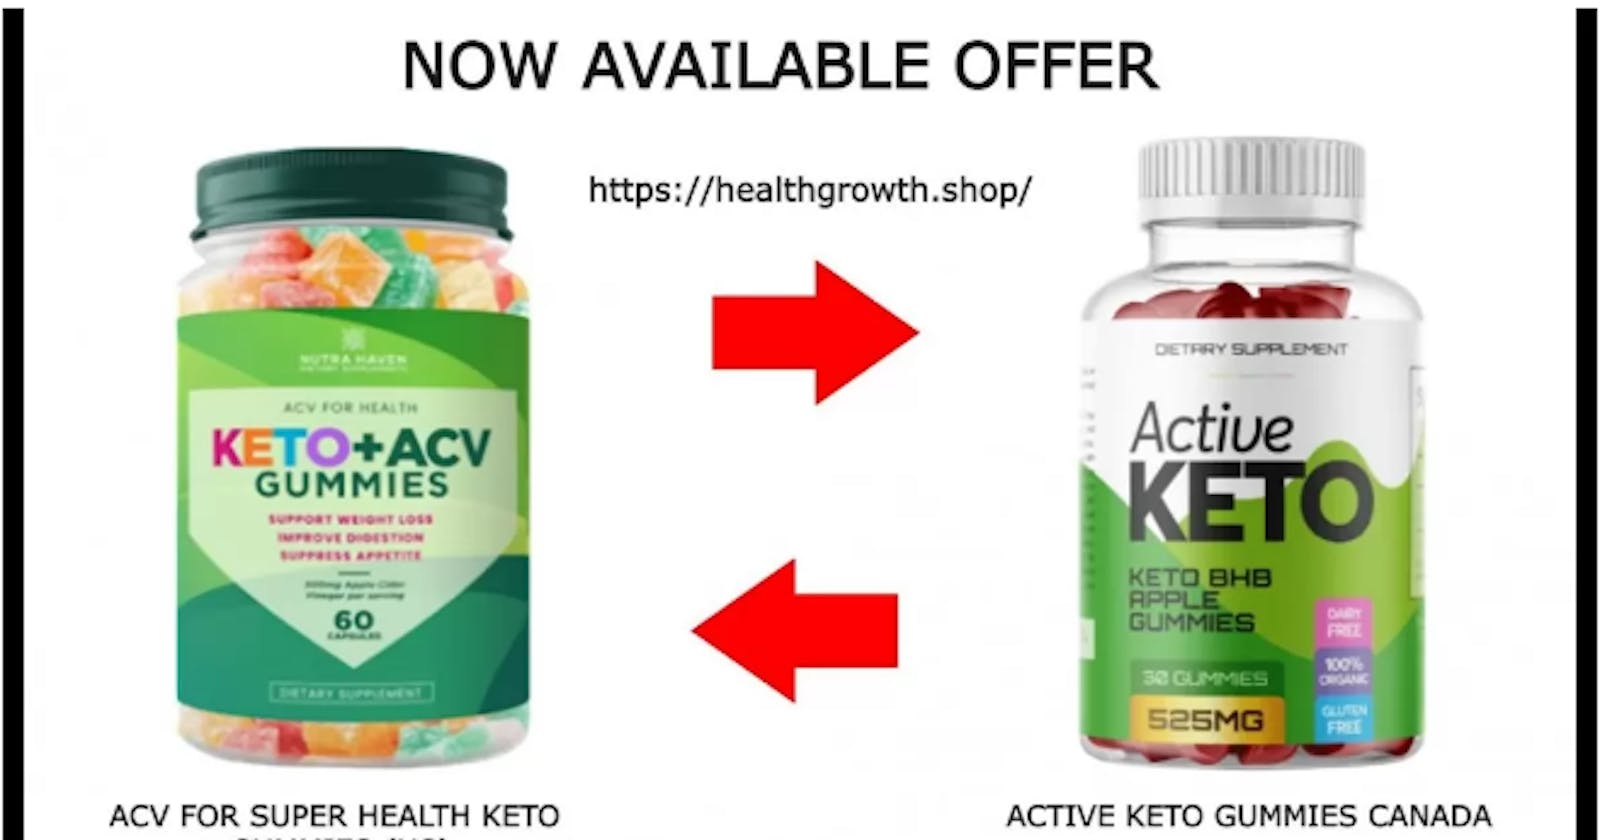 Super Health Keto Gummies Reviews [Scam Warning 2023] Full Spectrum Keto| Scam Exposed! Review The Reality Before Buy!